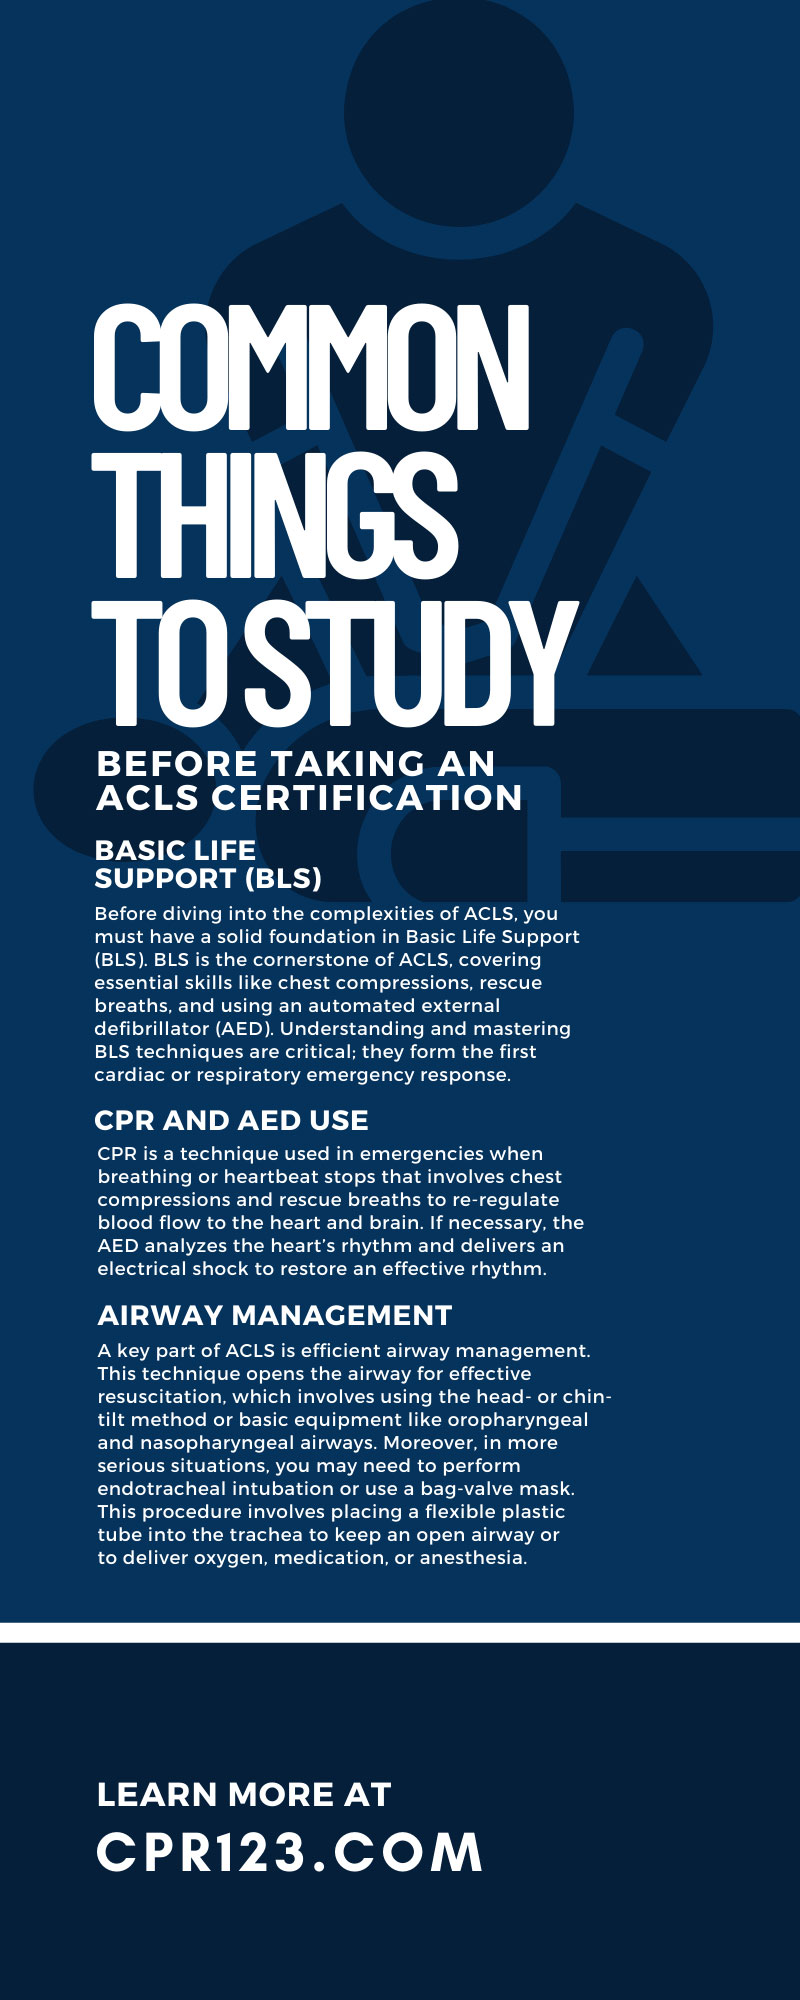 Common Things To Study Before Taking an ACLS Certification
